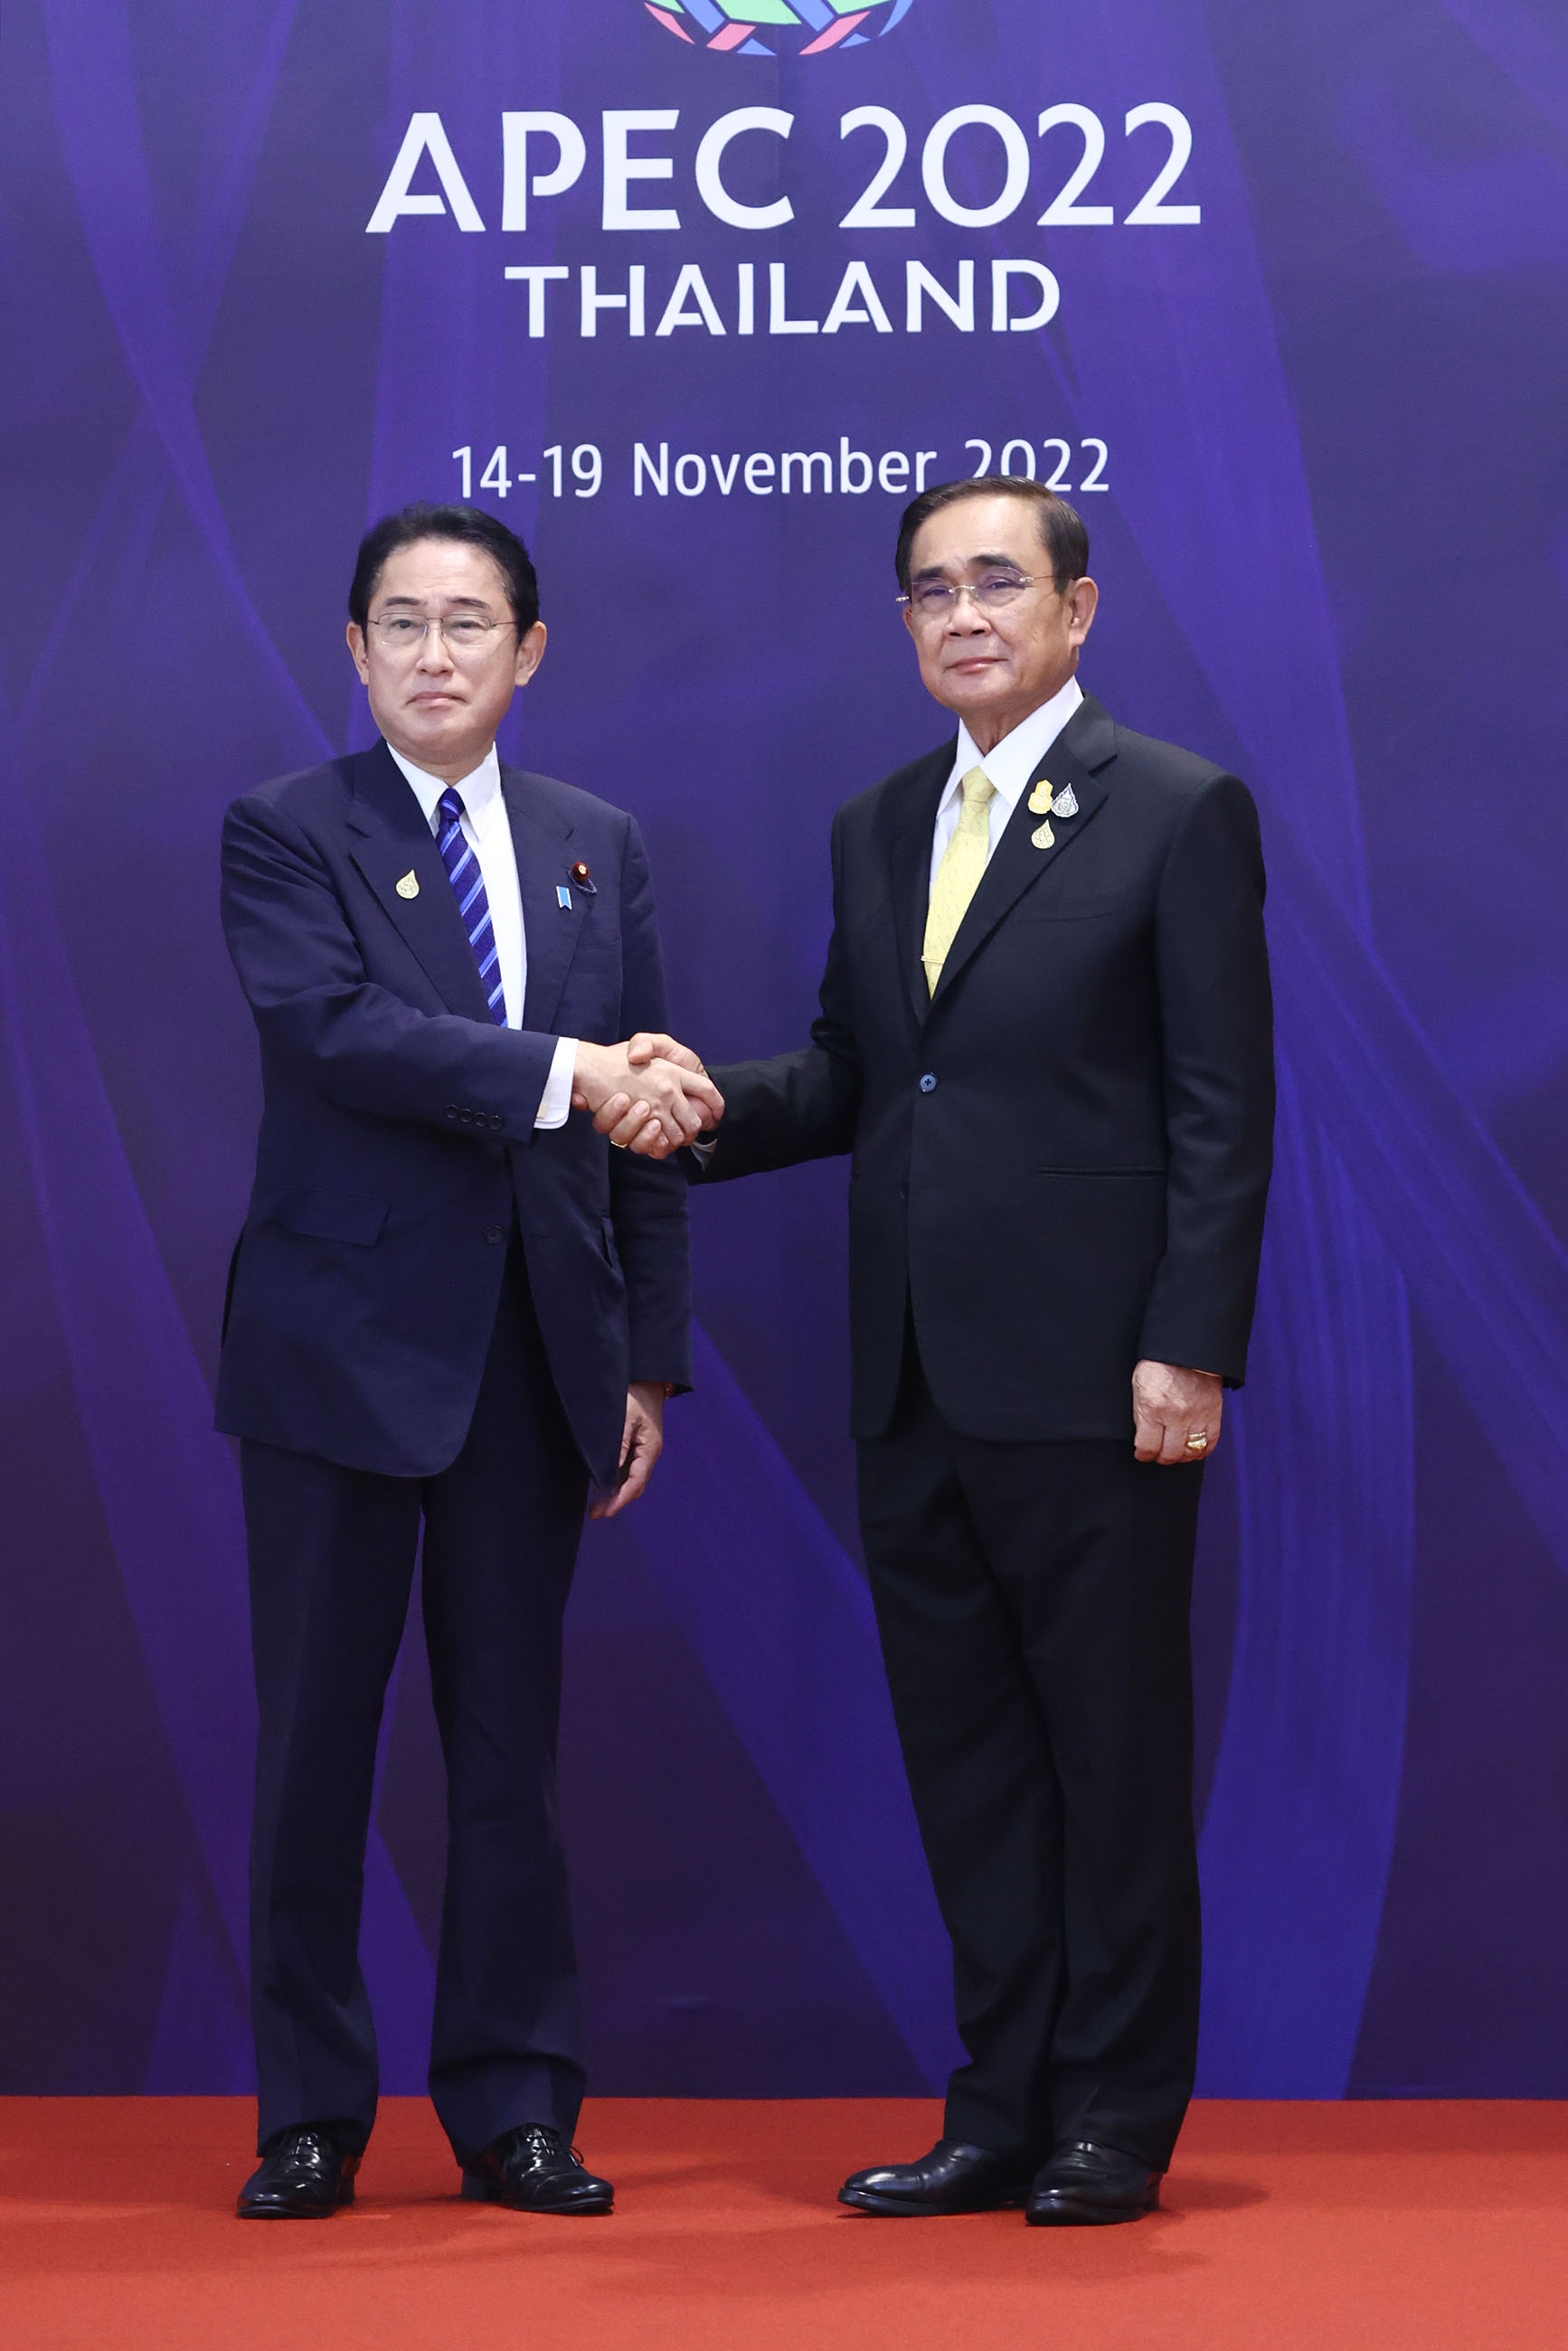 Prime Minister Kishida welcomed by Prime Minister and Minister of Defense Prayuth Chan-ocha of Thailand (2)